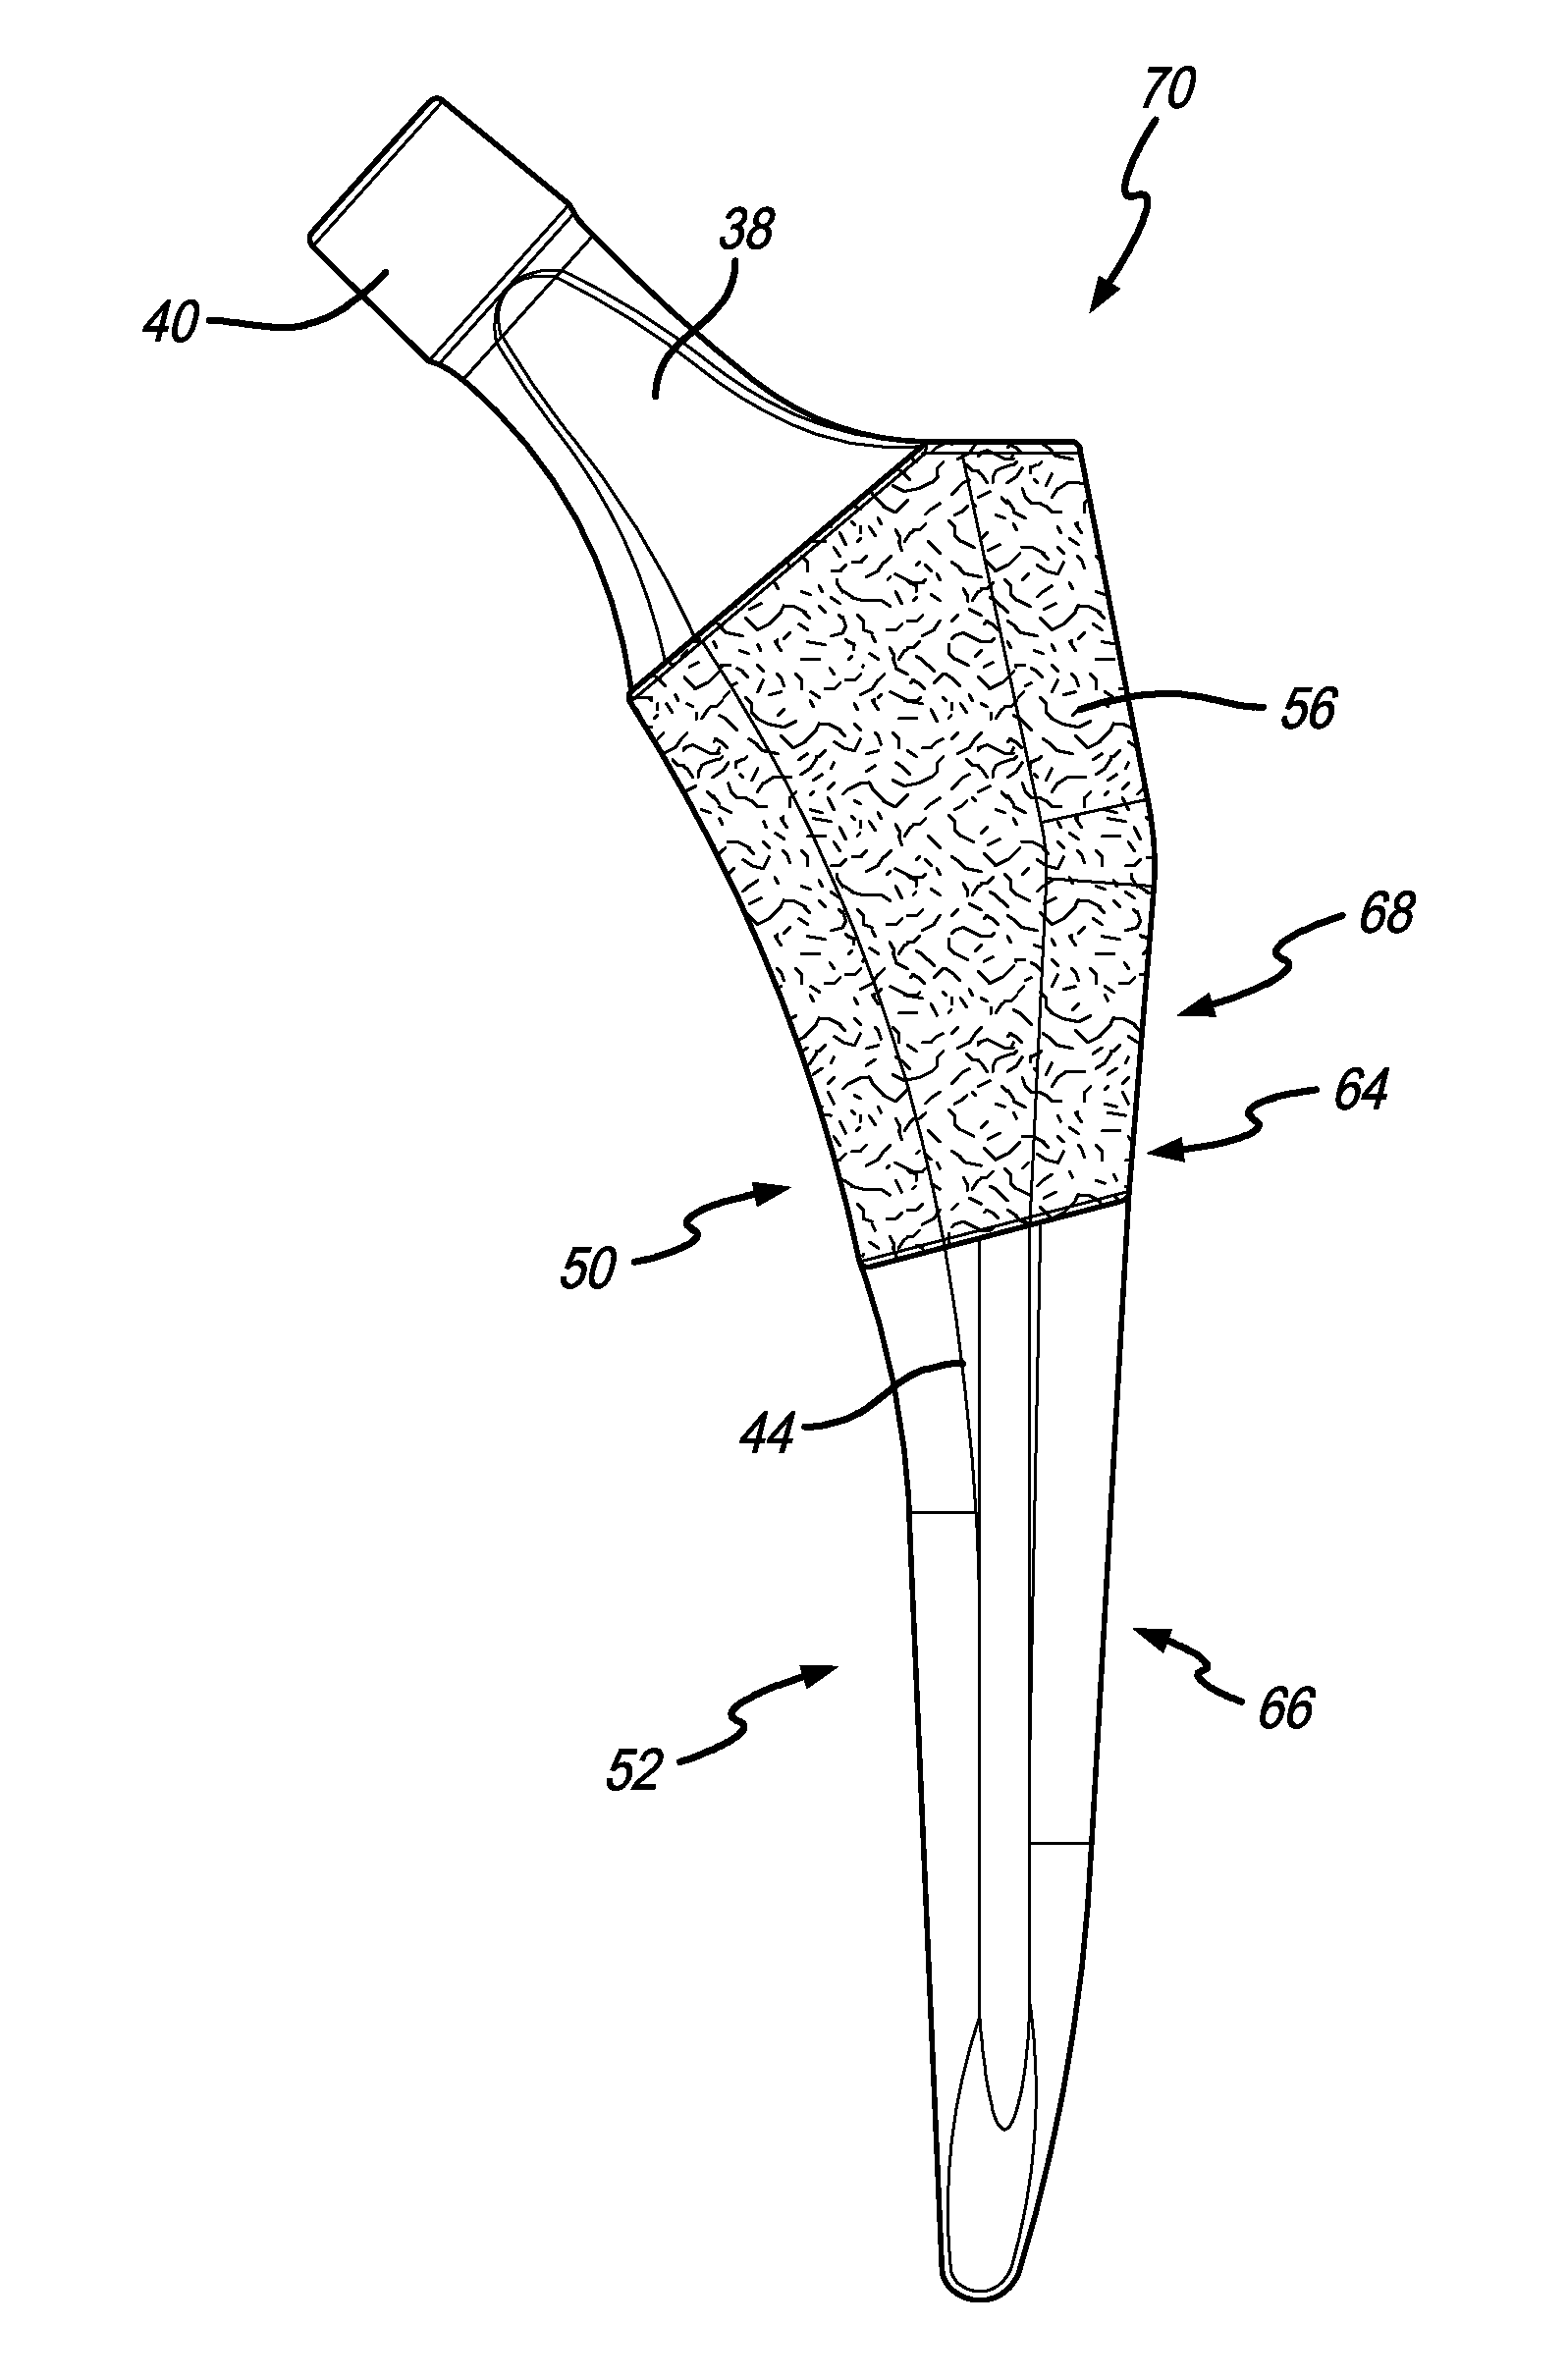 Femoral stem with partially recessed porous coating